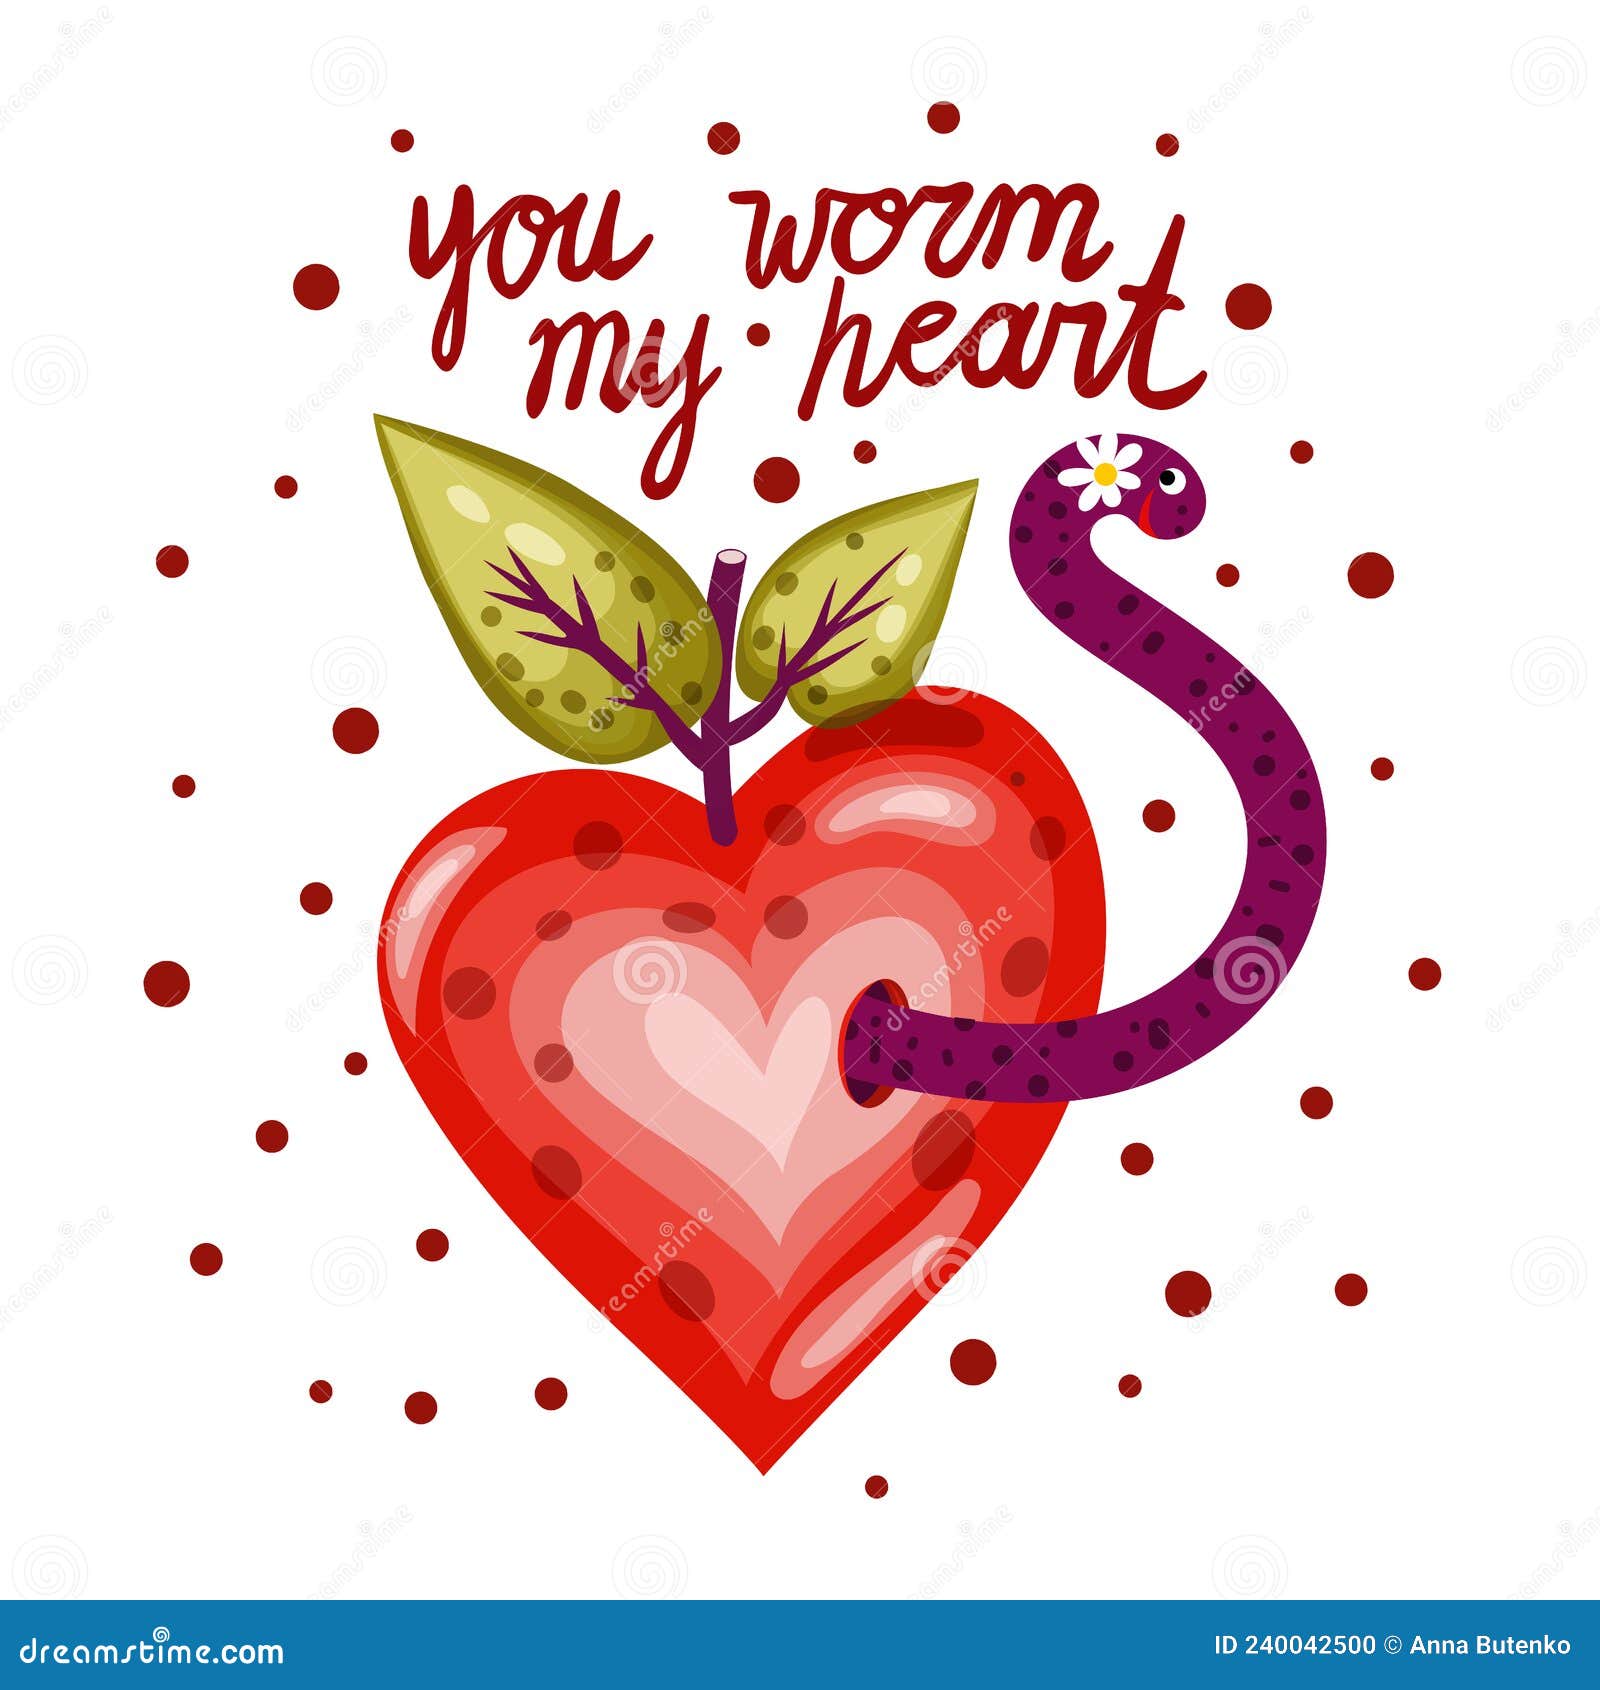 You Worm My Heart Lettering and Vector Art with a Heart Shaped